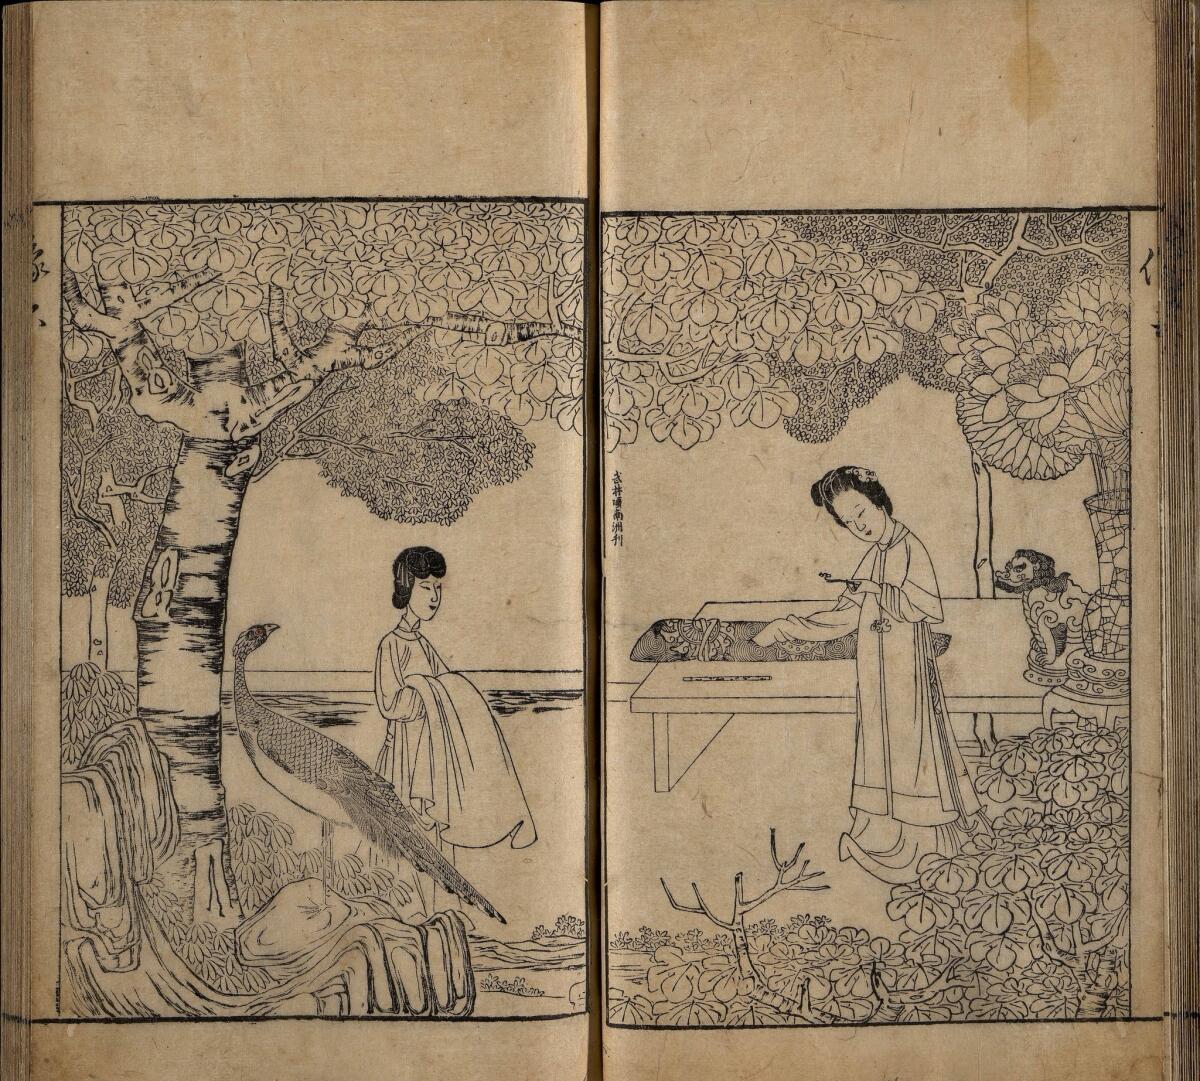 Illustration from "Rare Edition of the Northern Story of the Western Chamber," corrected by Zhang Shenzhi, 1639. Zhang Daojun compiler and editor, Chen Hongshou artist, Xiang Nanzhou carver. Woodblock-printed book, ink on paper, each page 11 by 6 3/4 inches. (National Library of China)